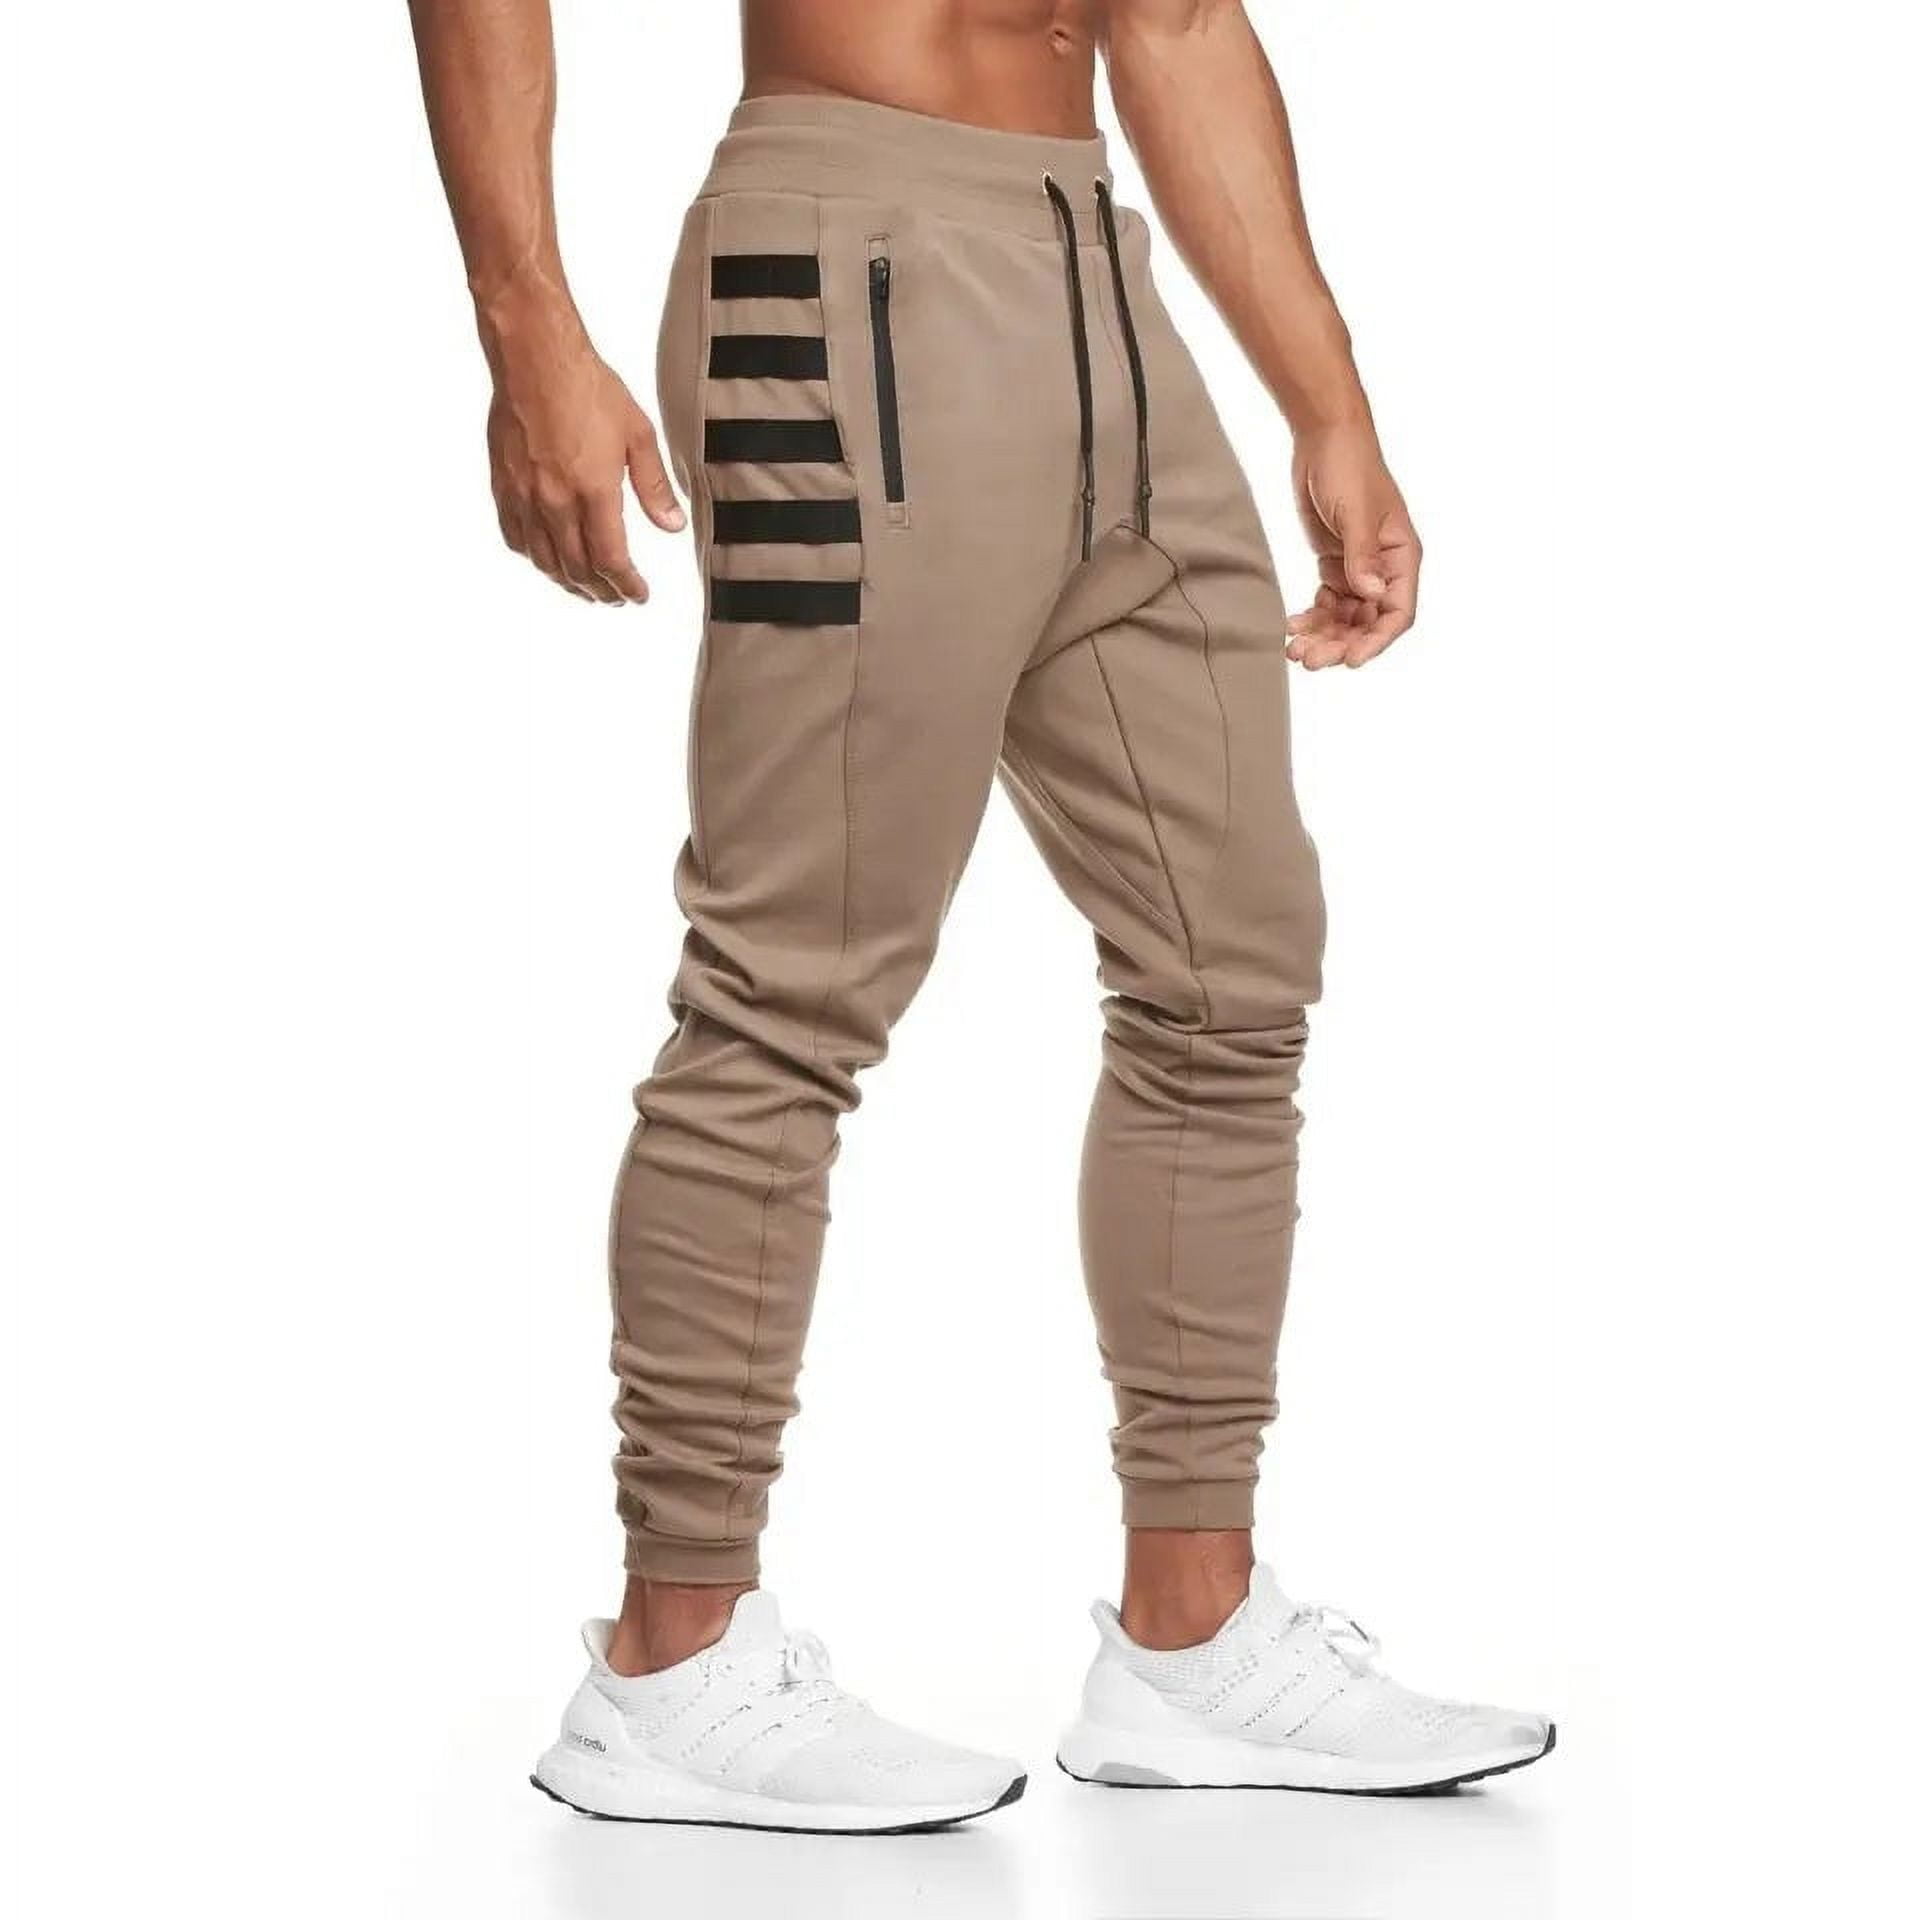 eczipvz Cargo Pants Mens Side Double Streamlines Joggers Pants,Casual Gym  Workout Pants Slim Fit Tapered SweatPants with Zip Pockets White,L